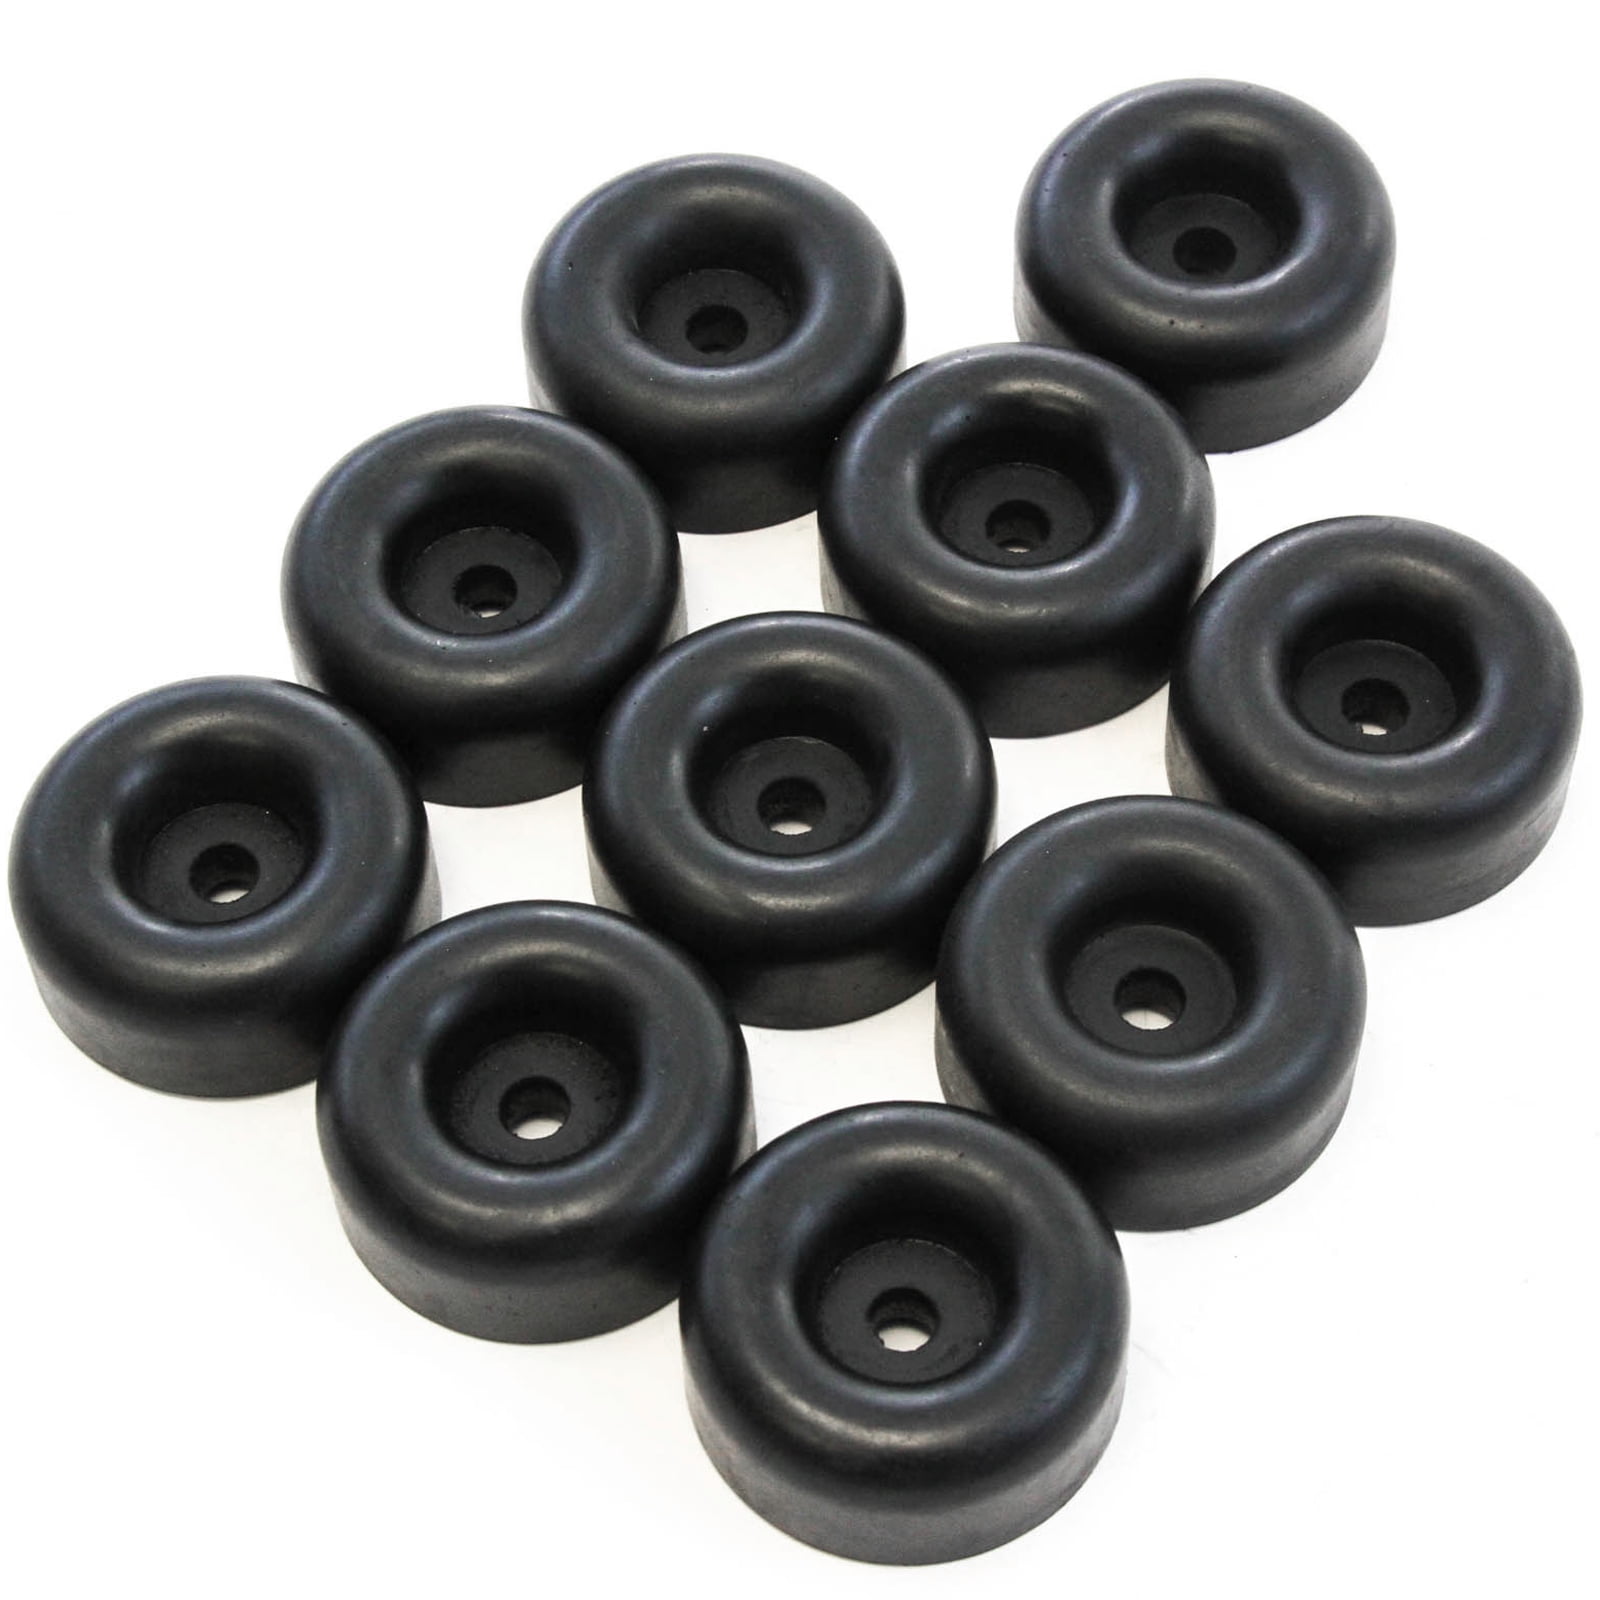 8 Details about    2.5" BLACK RUBBER BUMPERS with 7/16" Hole for Boat Trailer Door Ramp Guard 